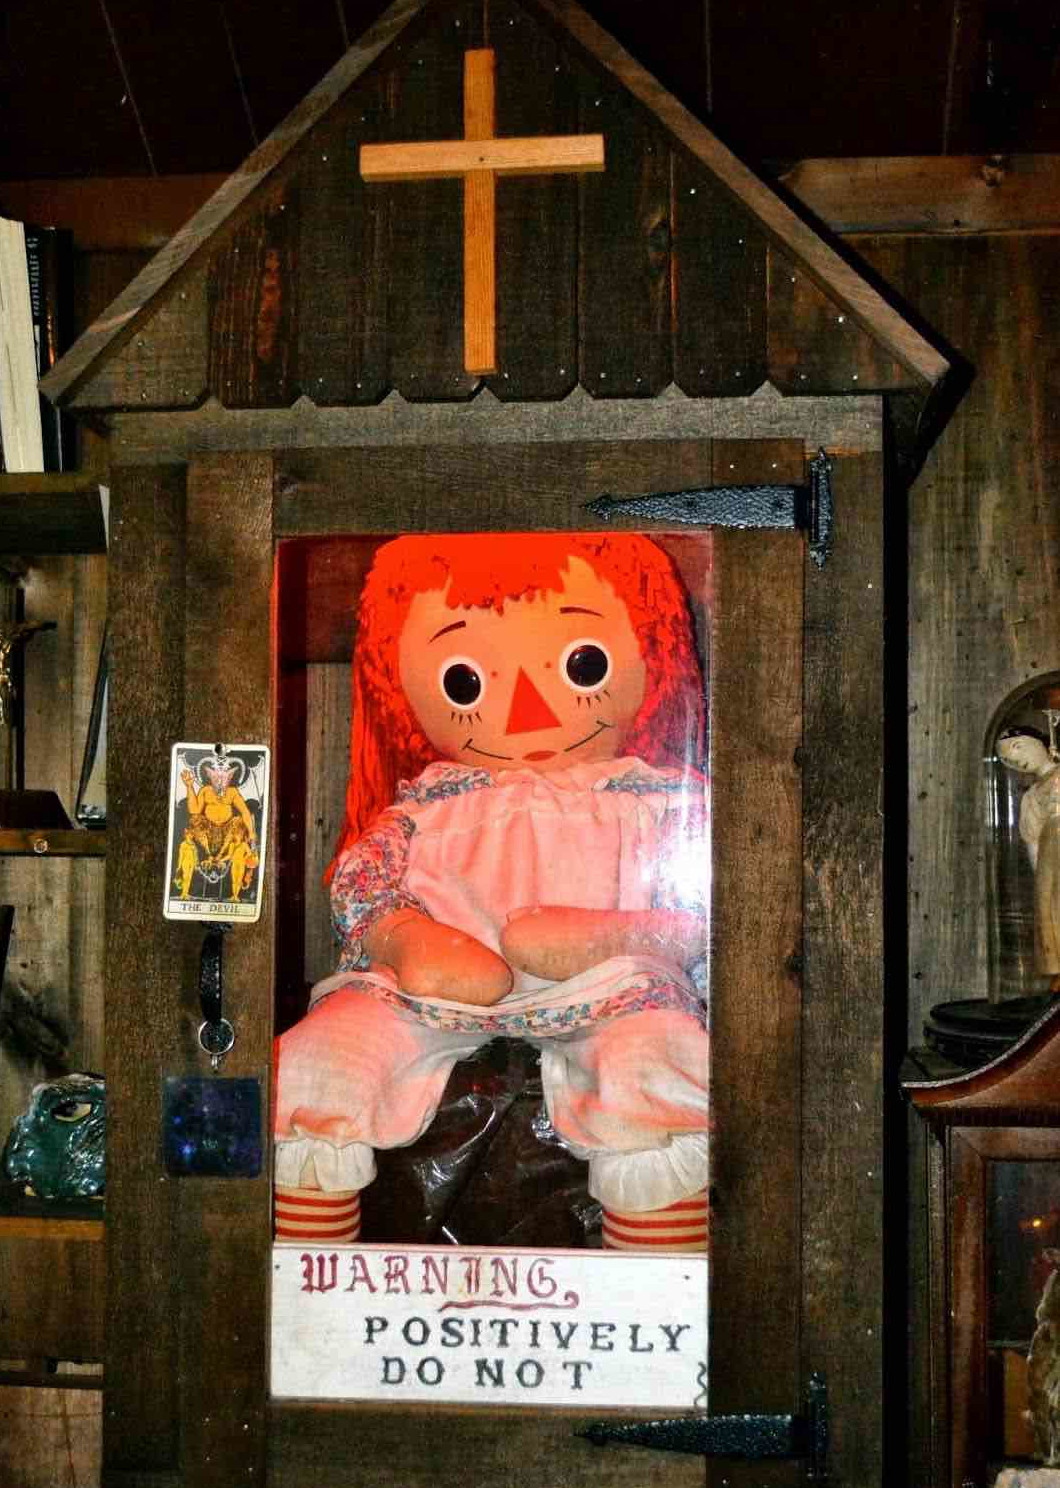 You may have been terrified by 'Annabelle', but what's even scarier is that she's a real doll. Learn more about the haunted doll and her crimes.